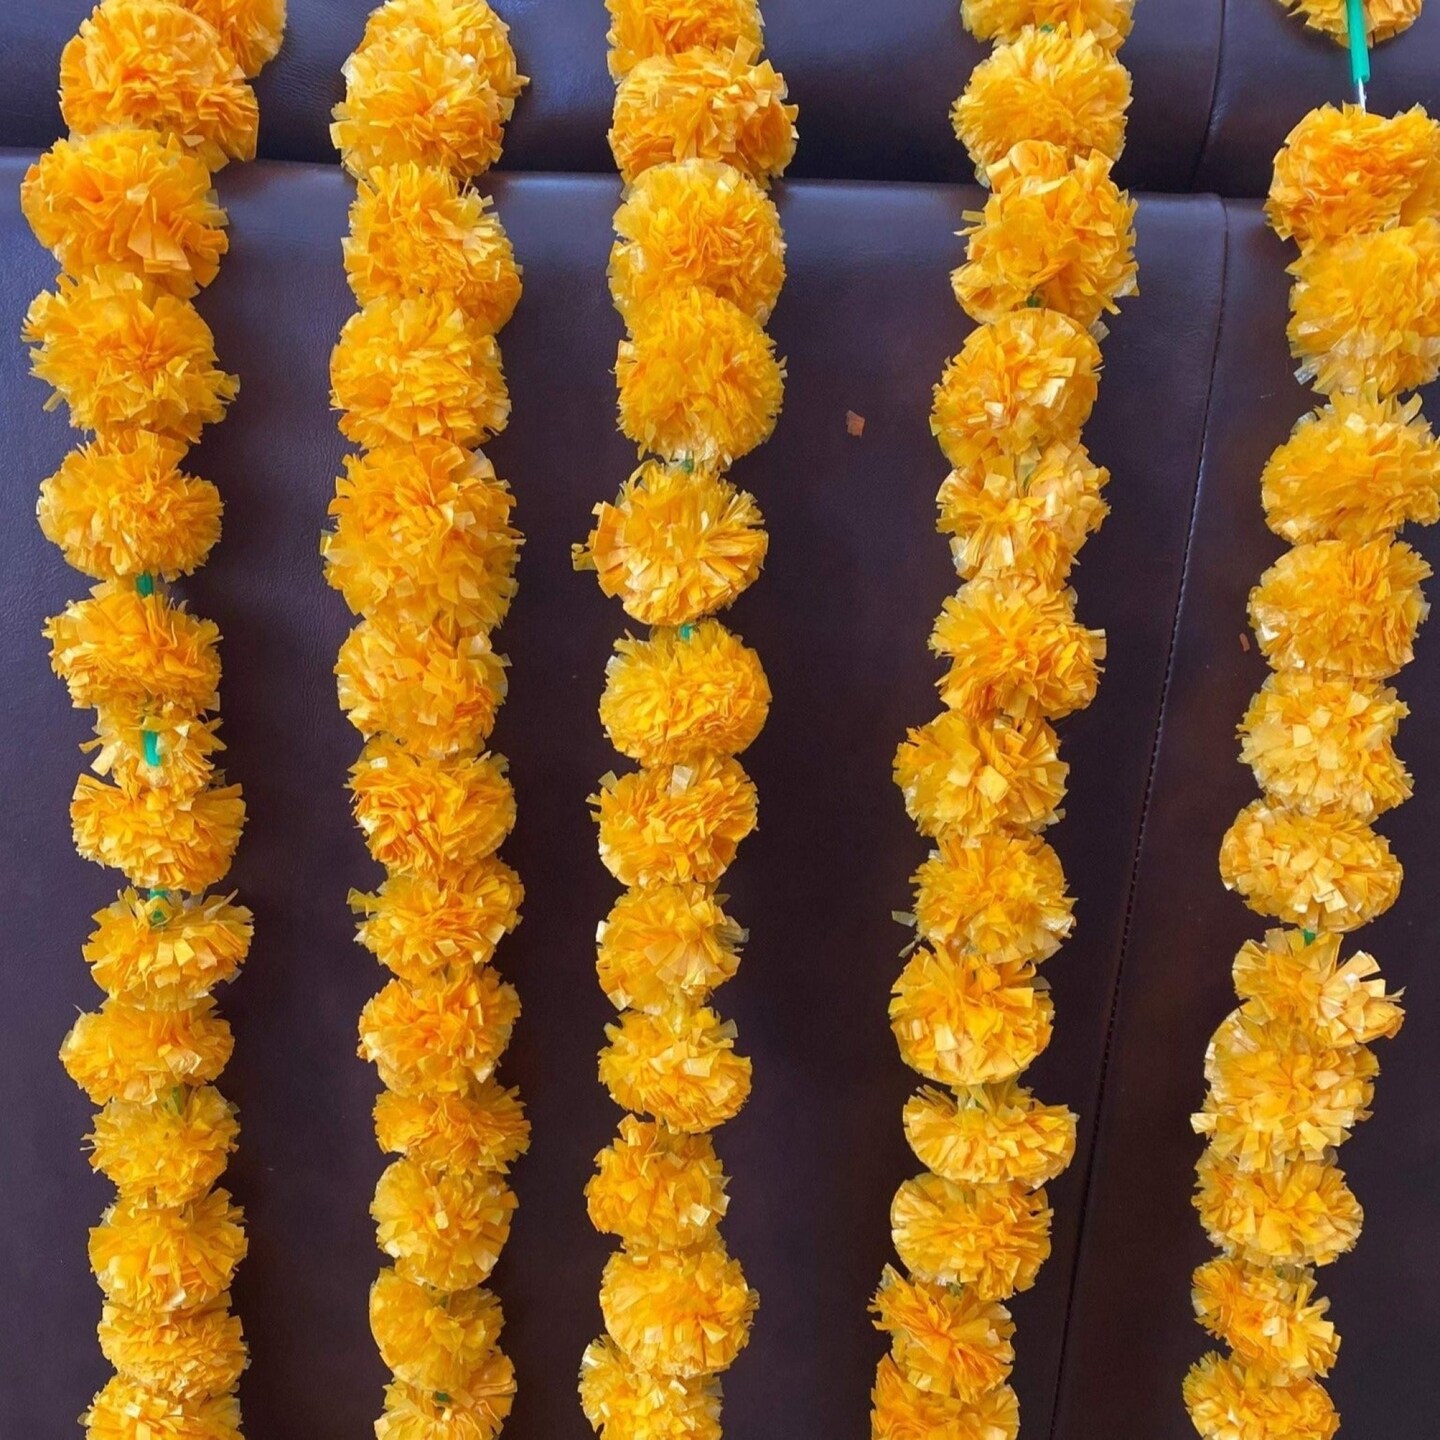 Artificial Marigold Strings, Diwali Decoration, Day Of The Dead, Halloween, Marygold Flower Garland, Pooja Backdrop, Aztec Marigold Flowers